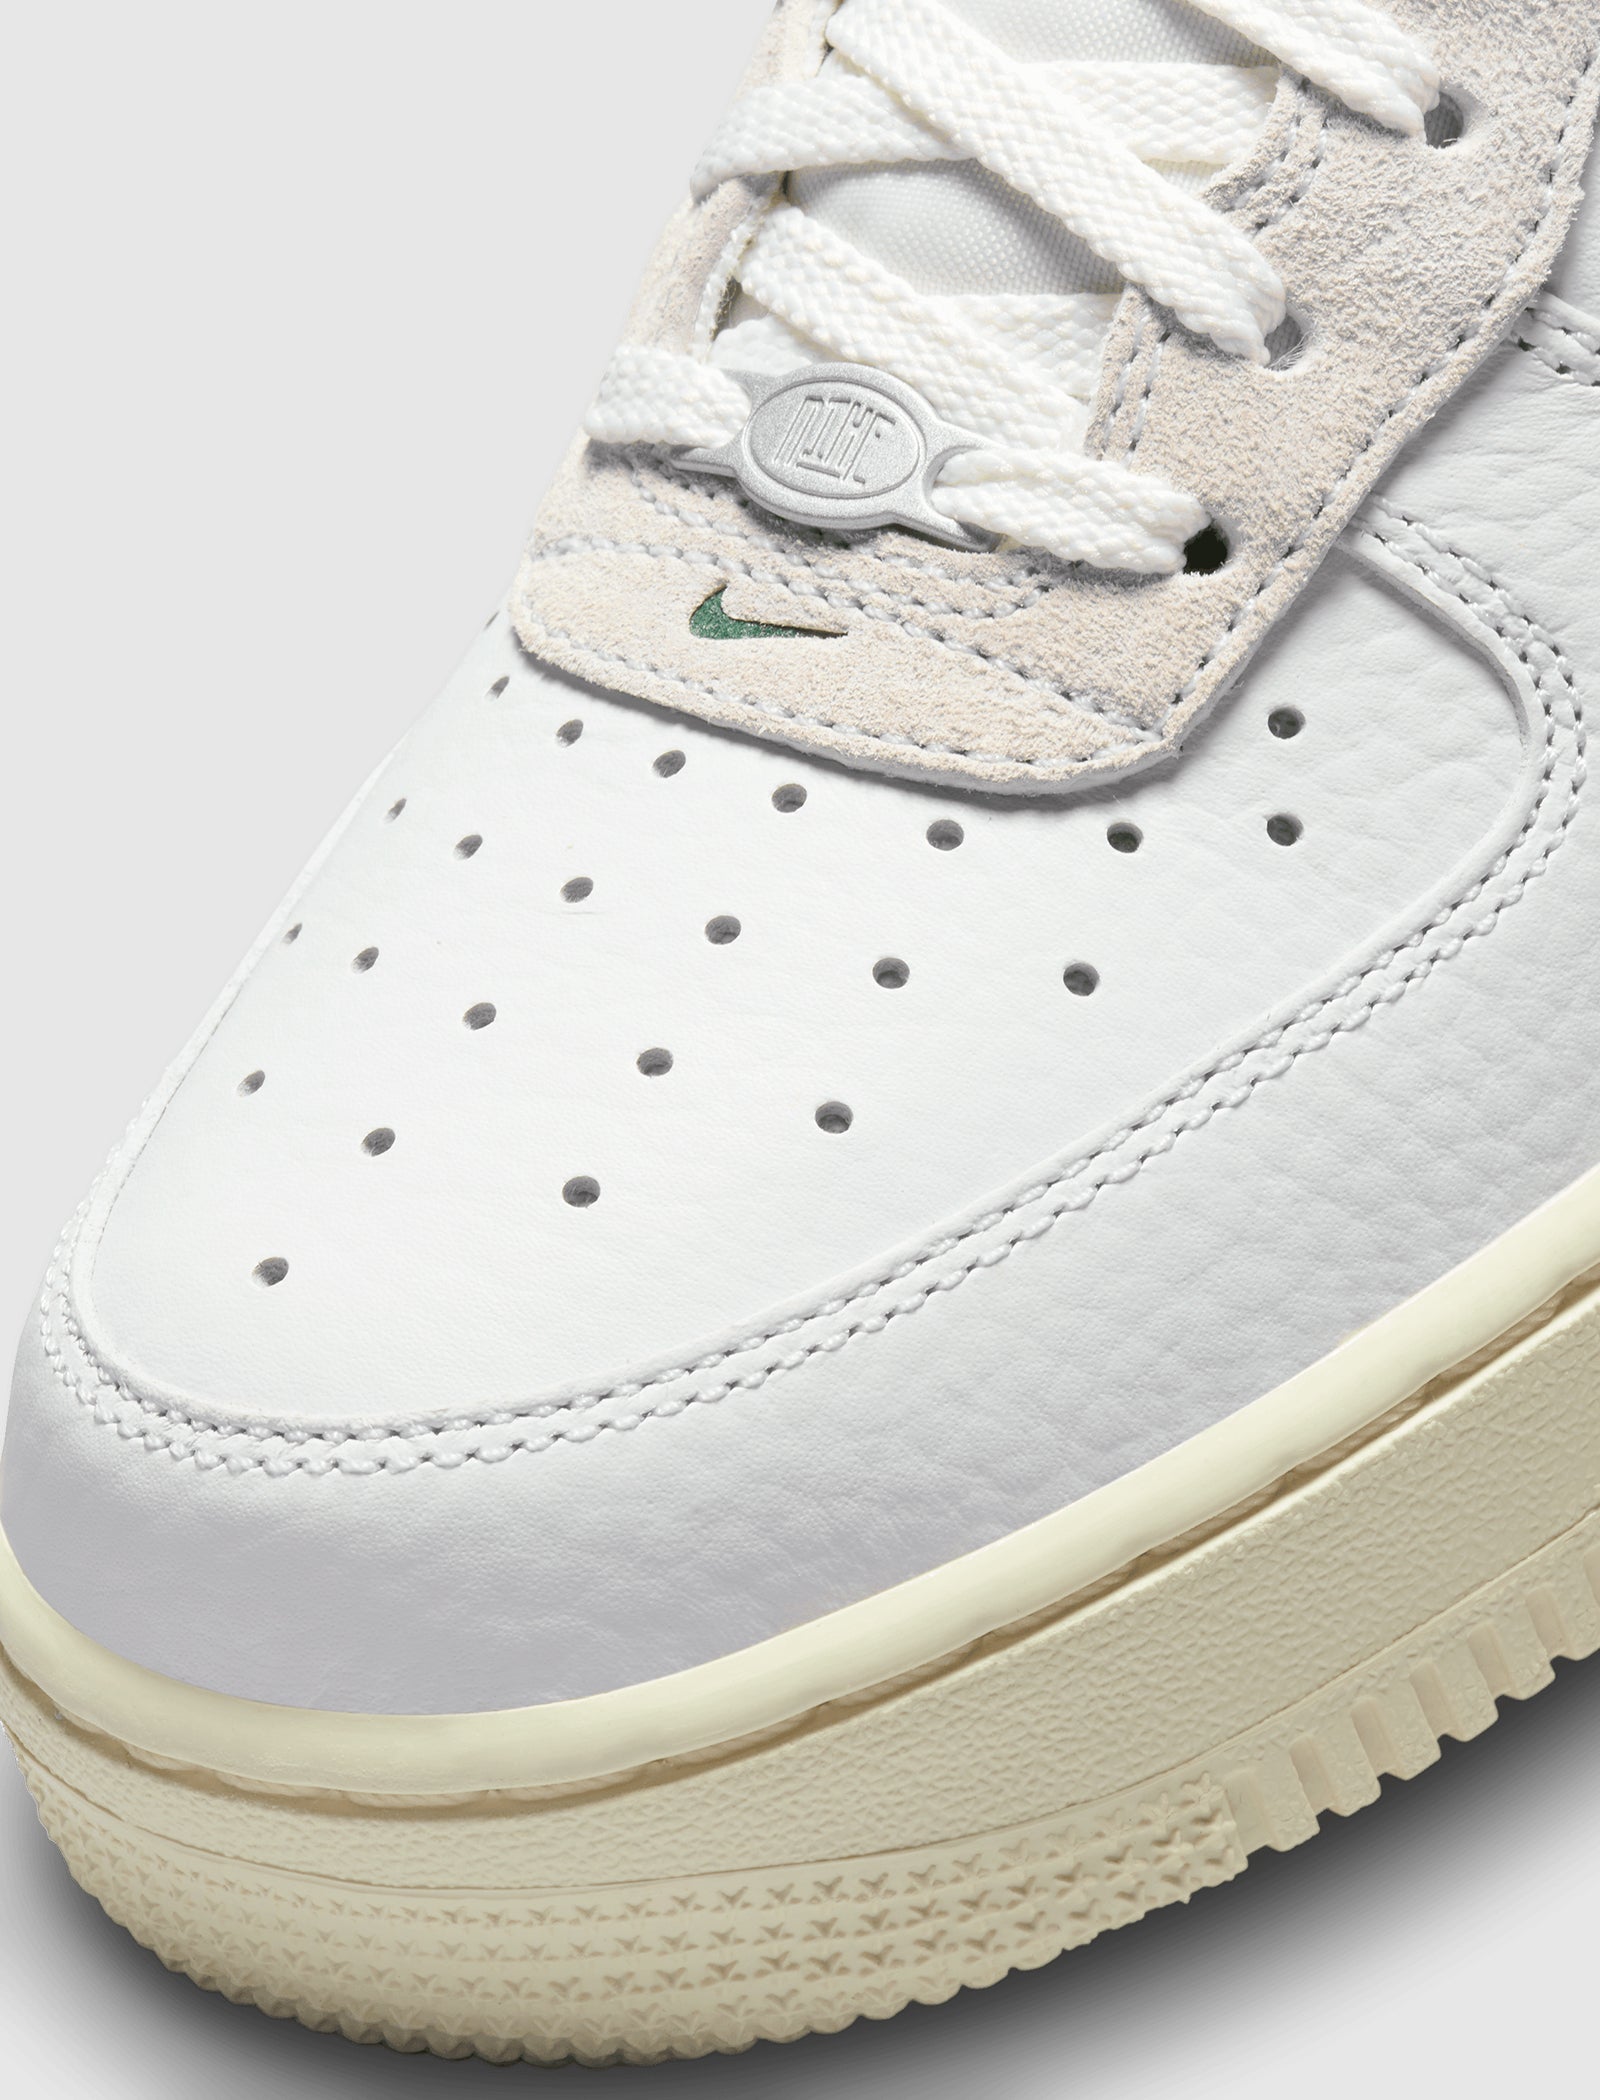 WOMEN'S AIR FORCE 1 '07 LX COMMAND FORCE 